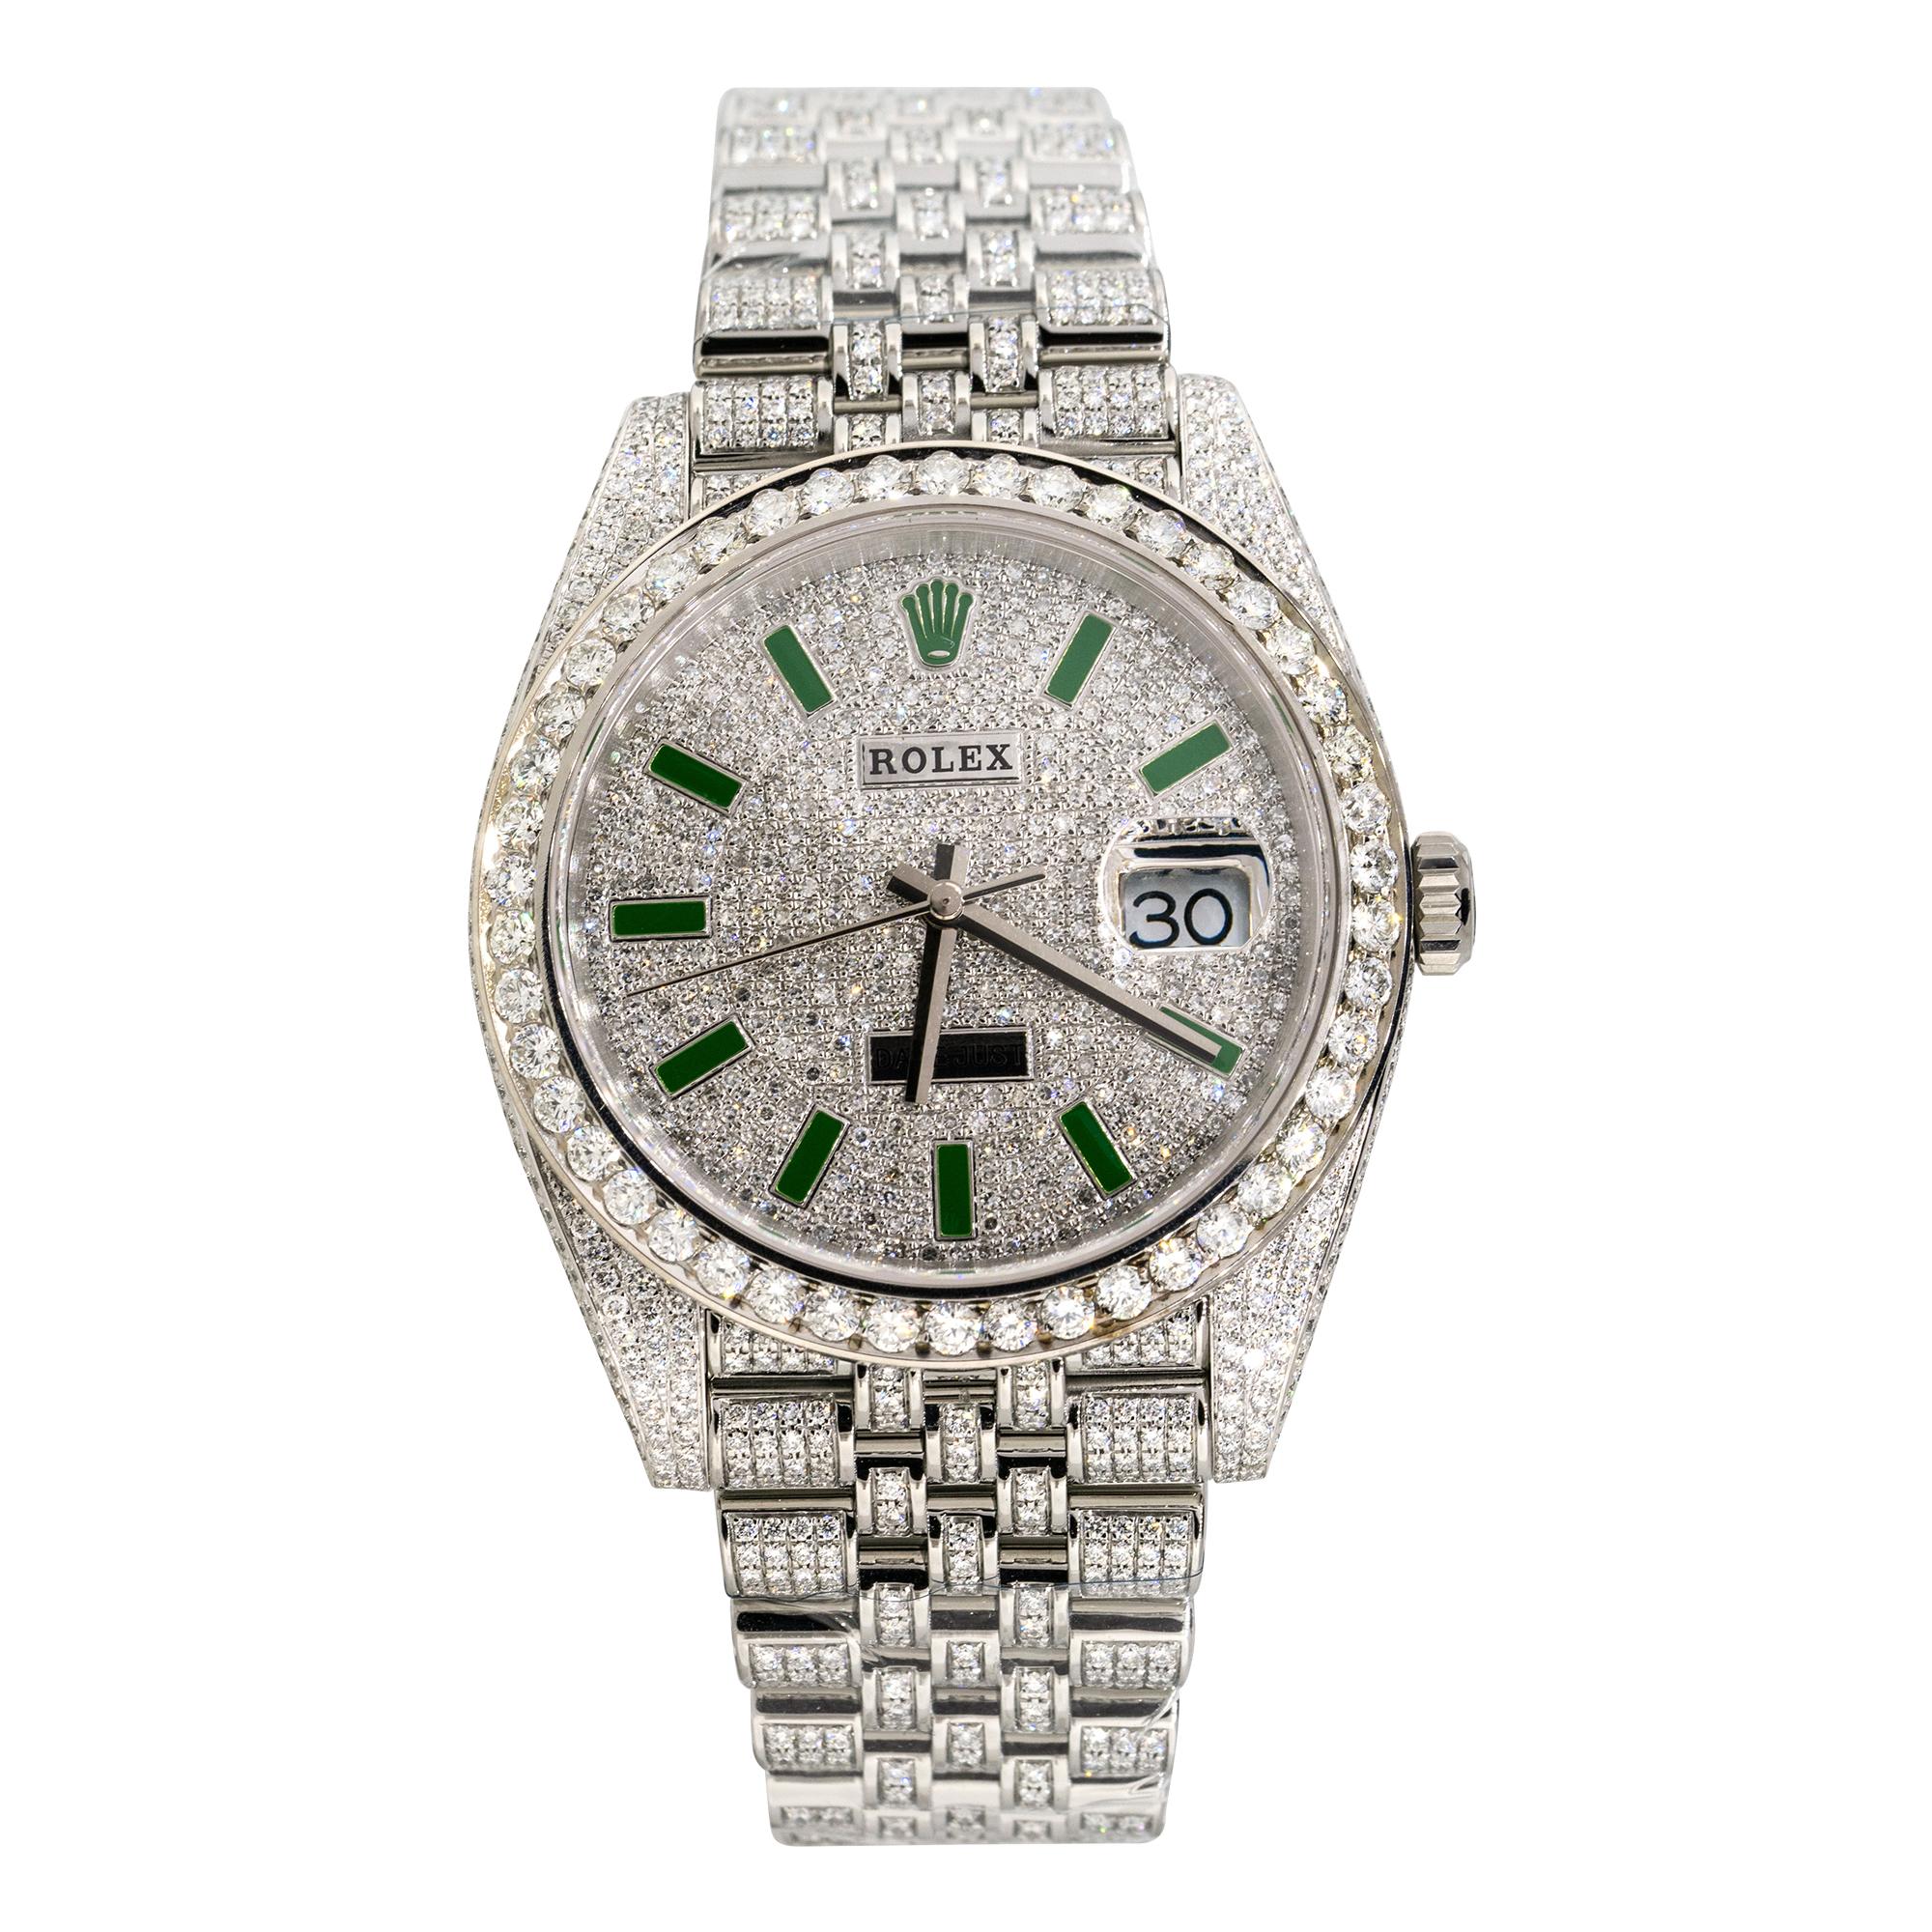 Brand: Rolex
MPN: 126300
Model: Datejust II
Case Material: Stainless steel with aftermarket Diamonds
Case Diameter: 41mm
Crystal: Sapphire Crystal
Bezel: Stainless steel bezel with aftermarket Diamonds
Dial: Dial with green hour markers, covered in